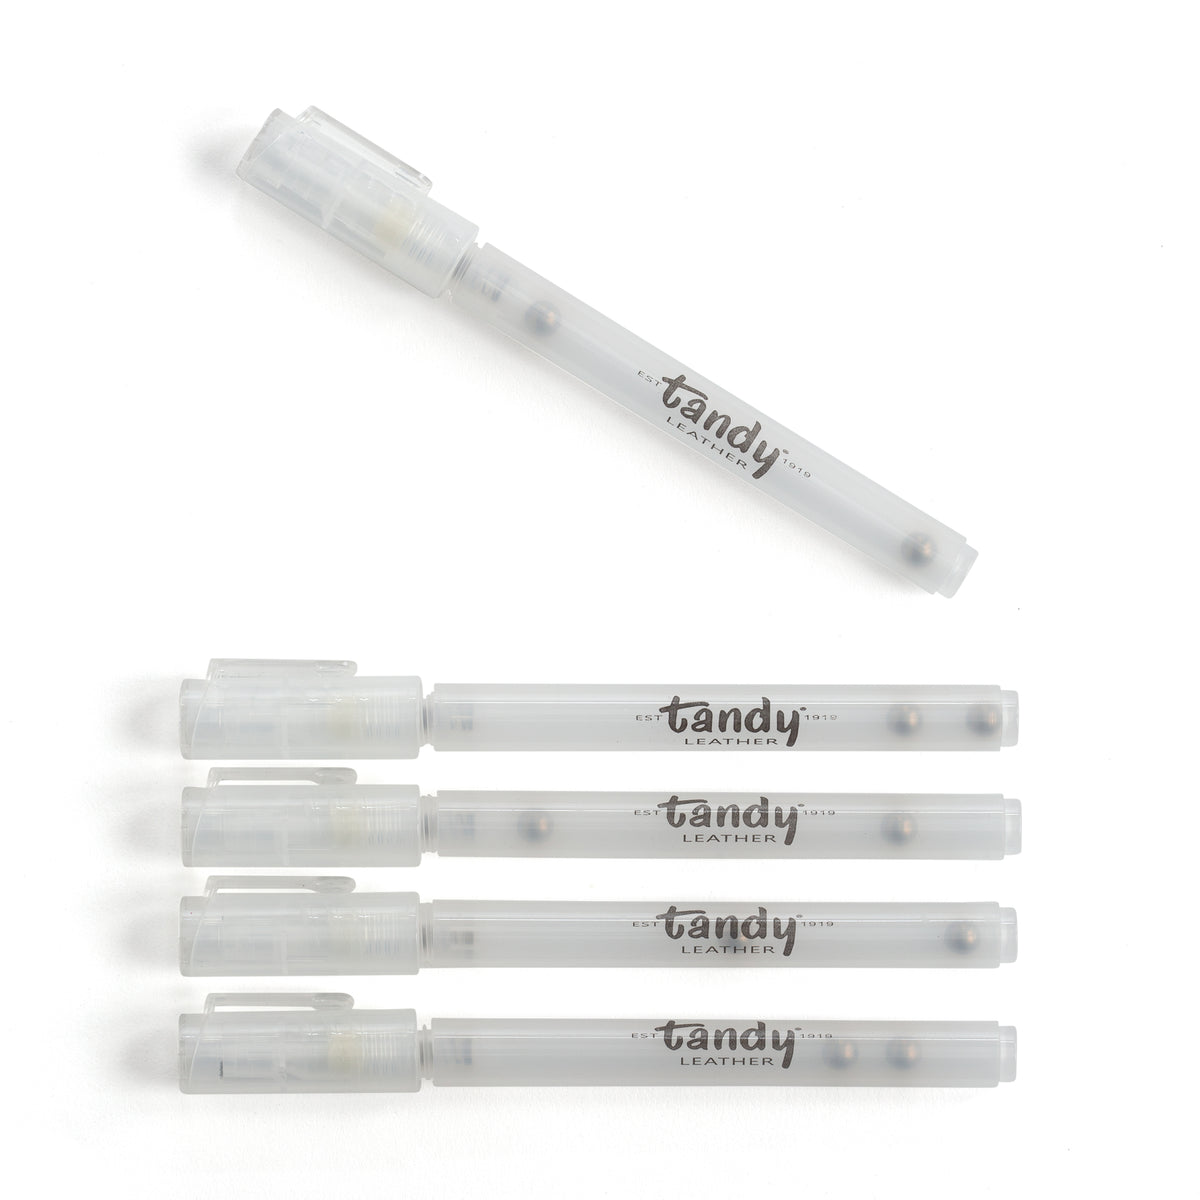 Reusable Dye Pen Set from Tandy Leather